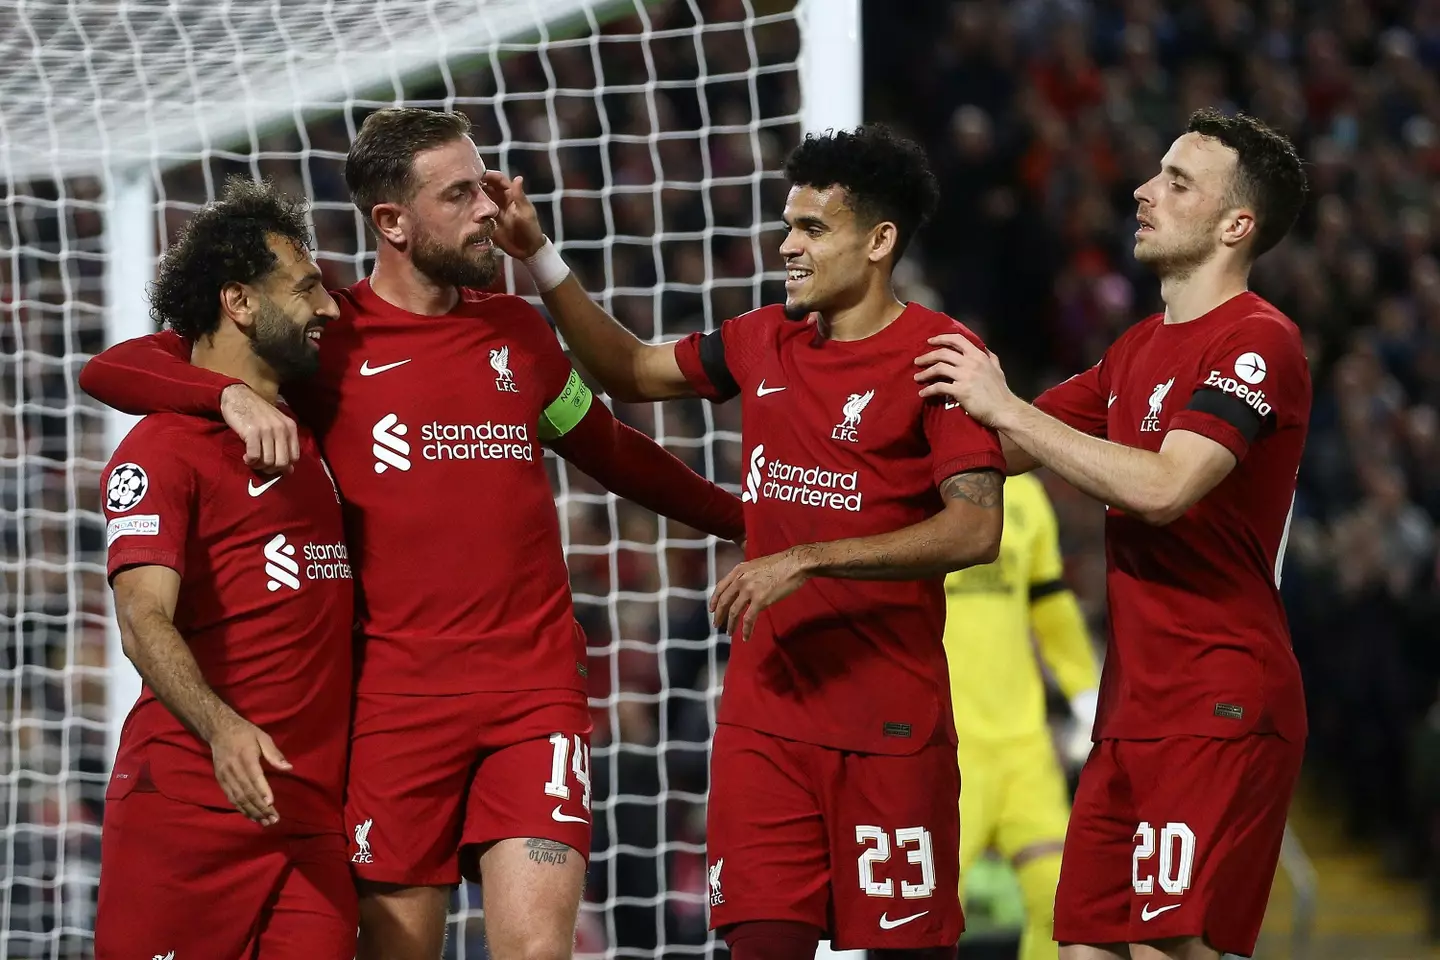 Liverpool players after their second goal of the game. (Image